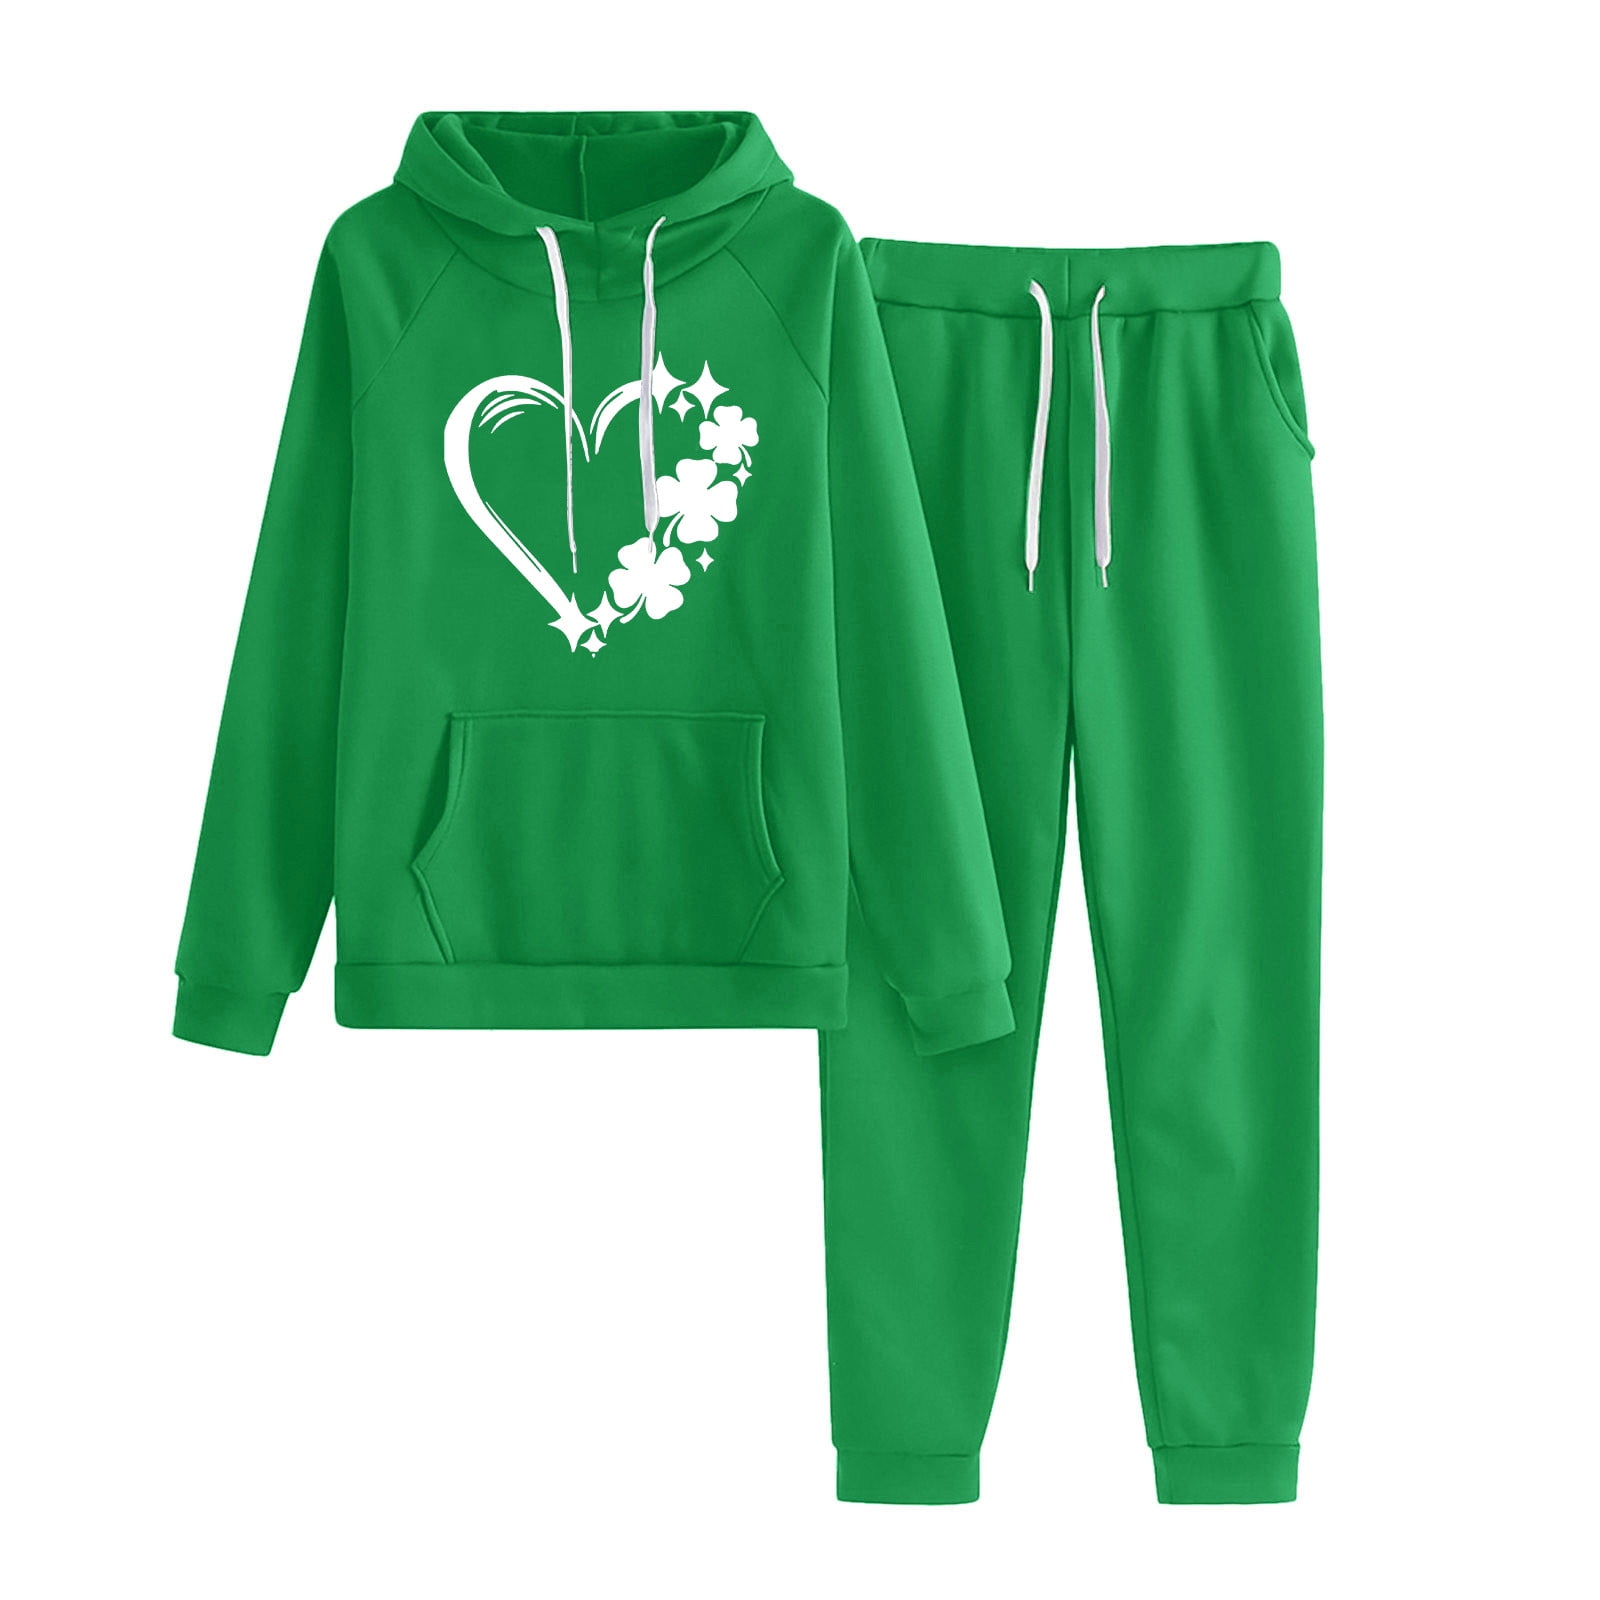 Posijego Womens St. Patrick's Day Sweatsuit Two Piece Outfit